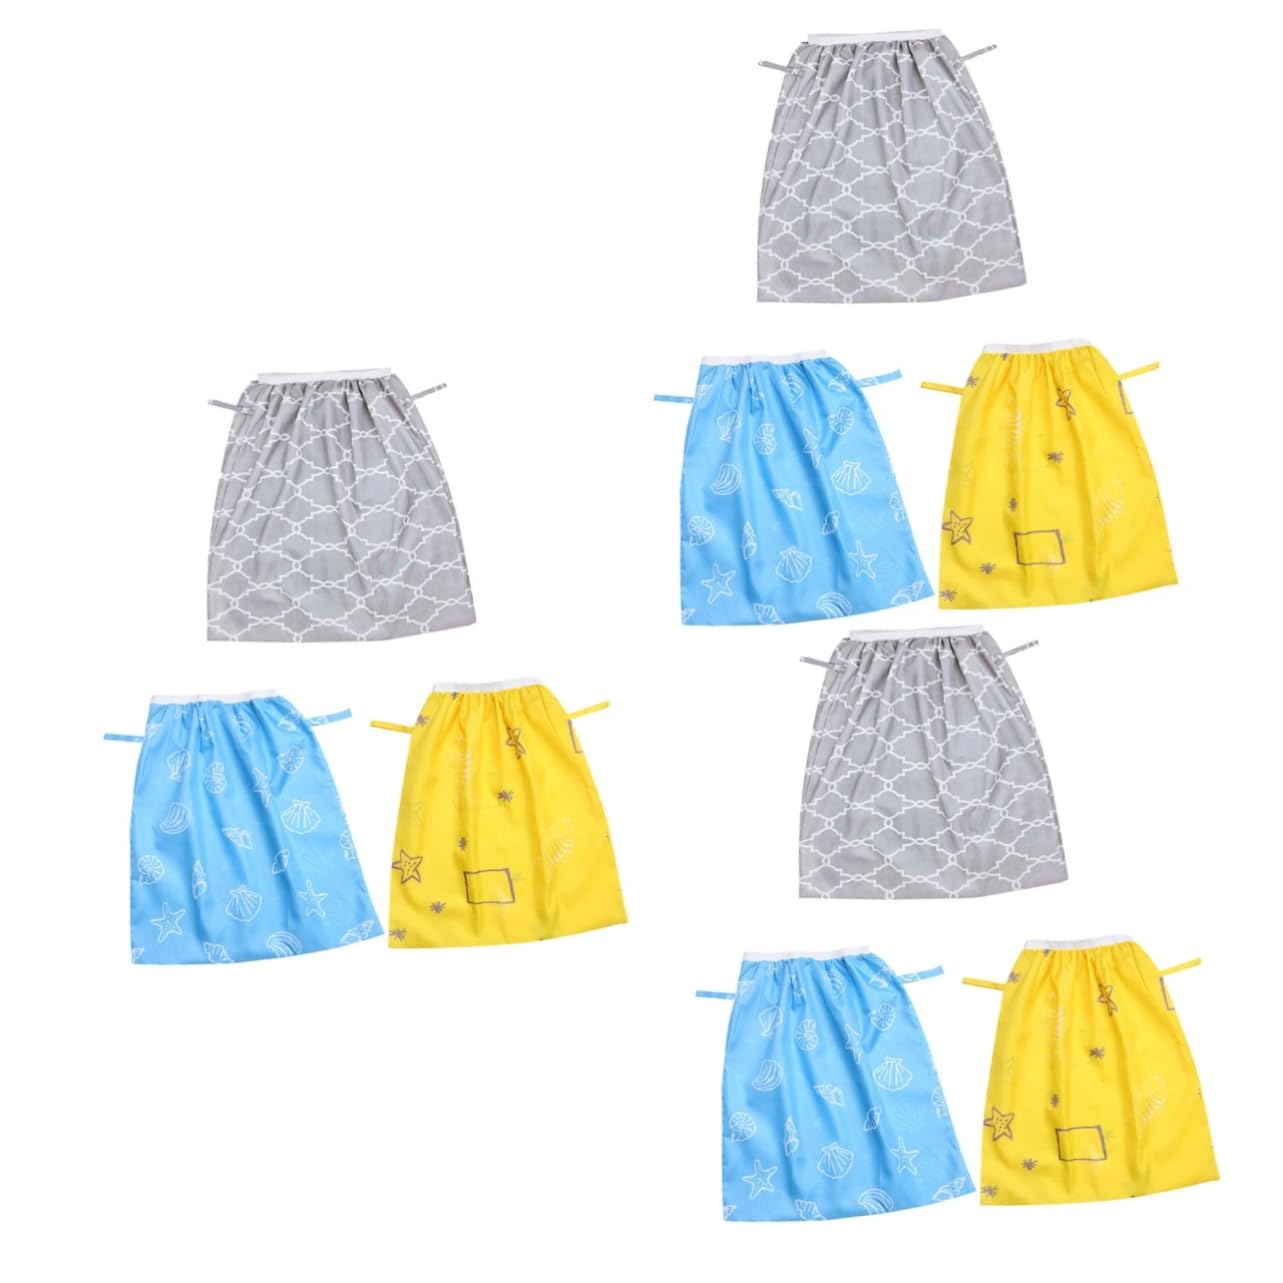 9 Pcs Diaper Storage Bag Garbage Can Diapers Wet Dry Nappy Bag Diaper Nappy Storage Pouch Nappy Pouch Diaper Storage Pouch Diaper Bag Lining Oxford Cloth. Baby